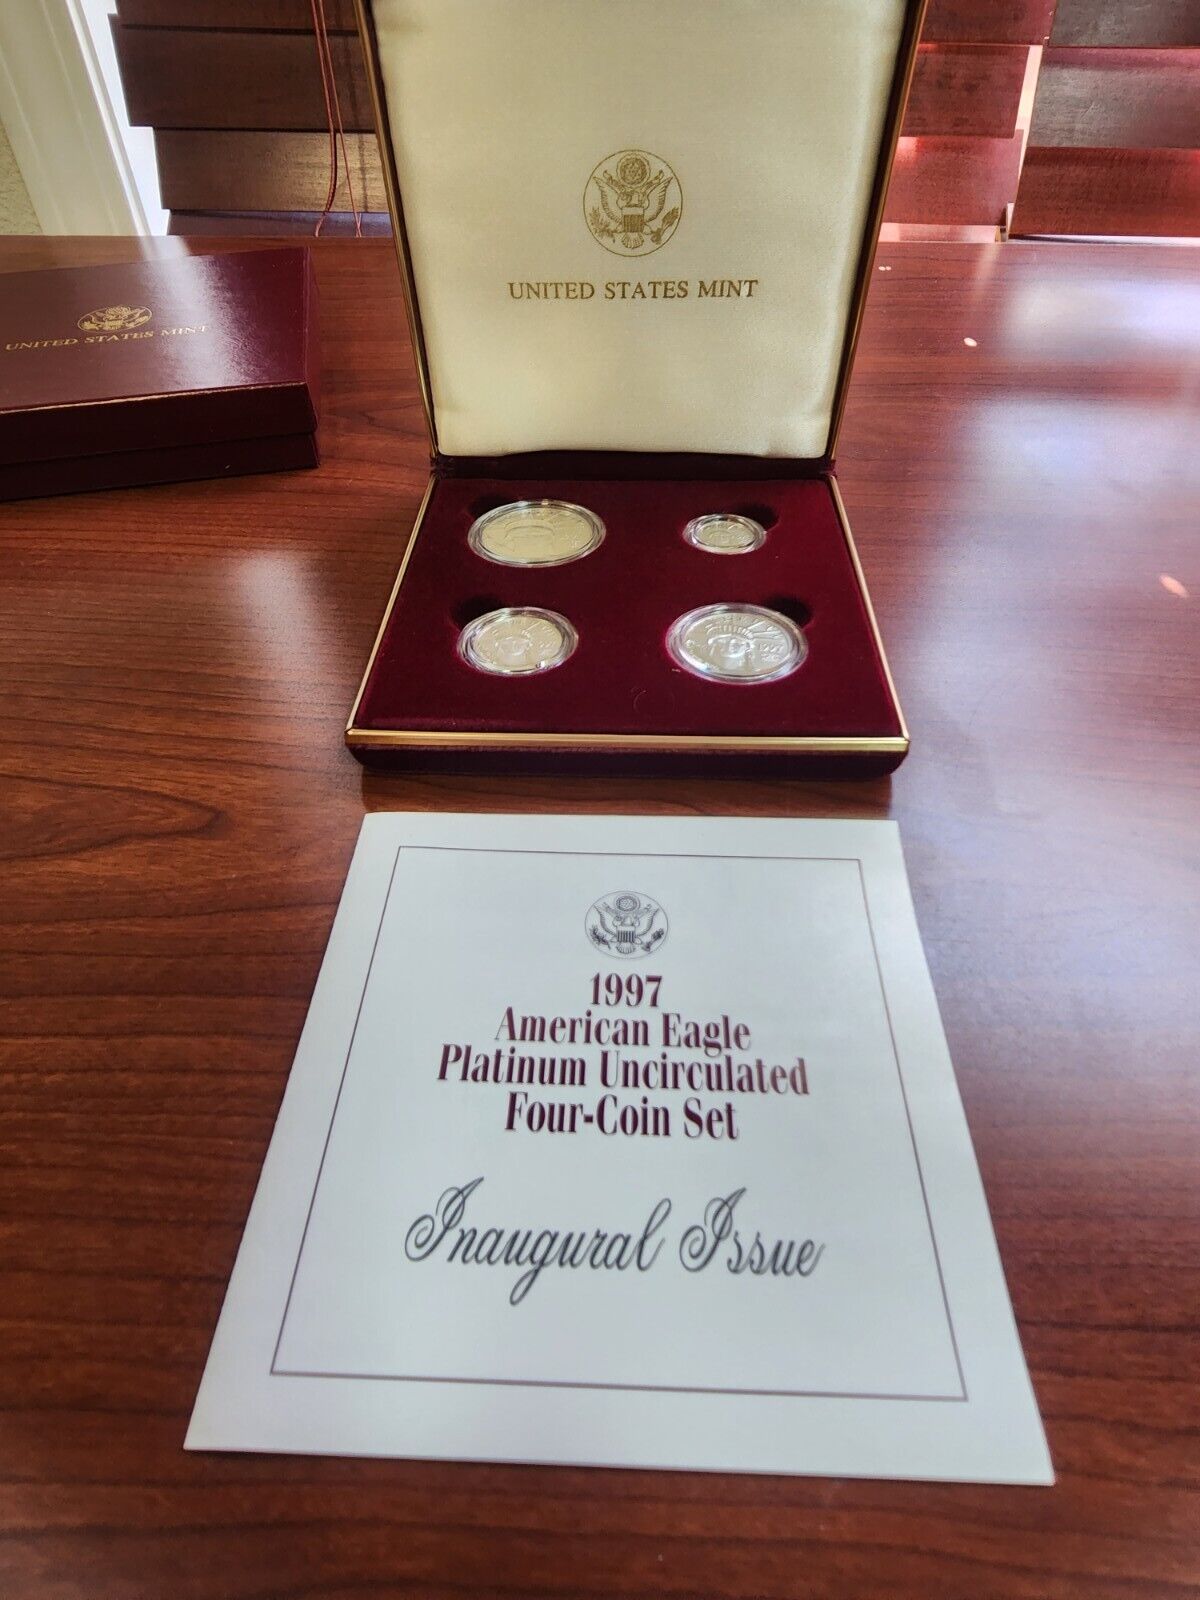 1997 American Eagle Platinum Uncirculated Four-coin Set/inaugural Issue